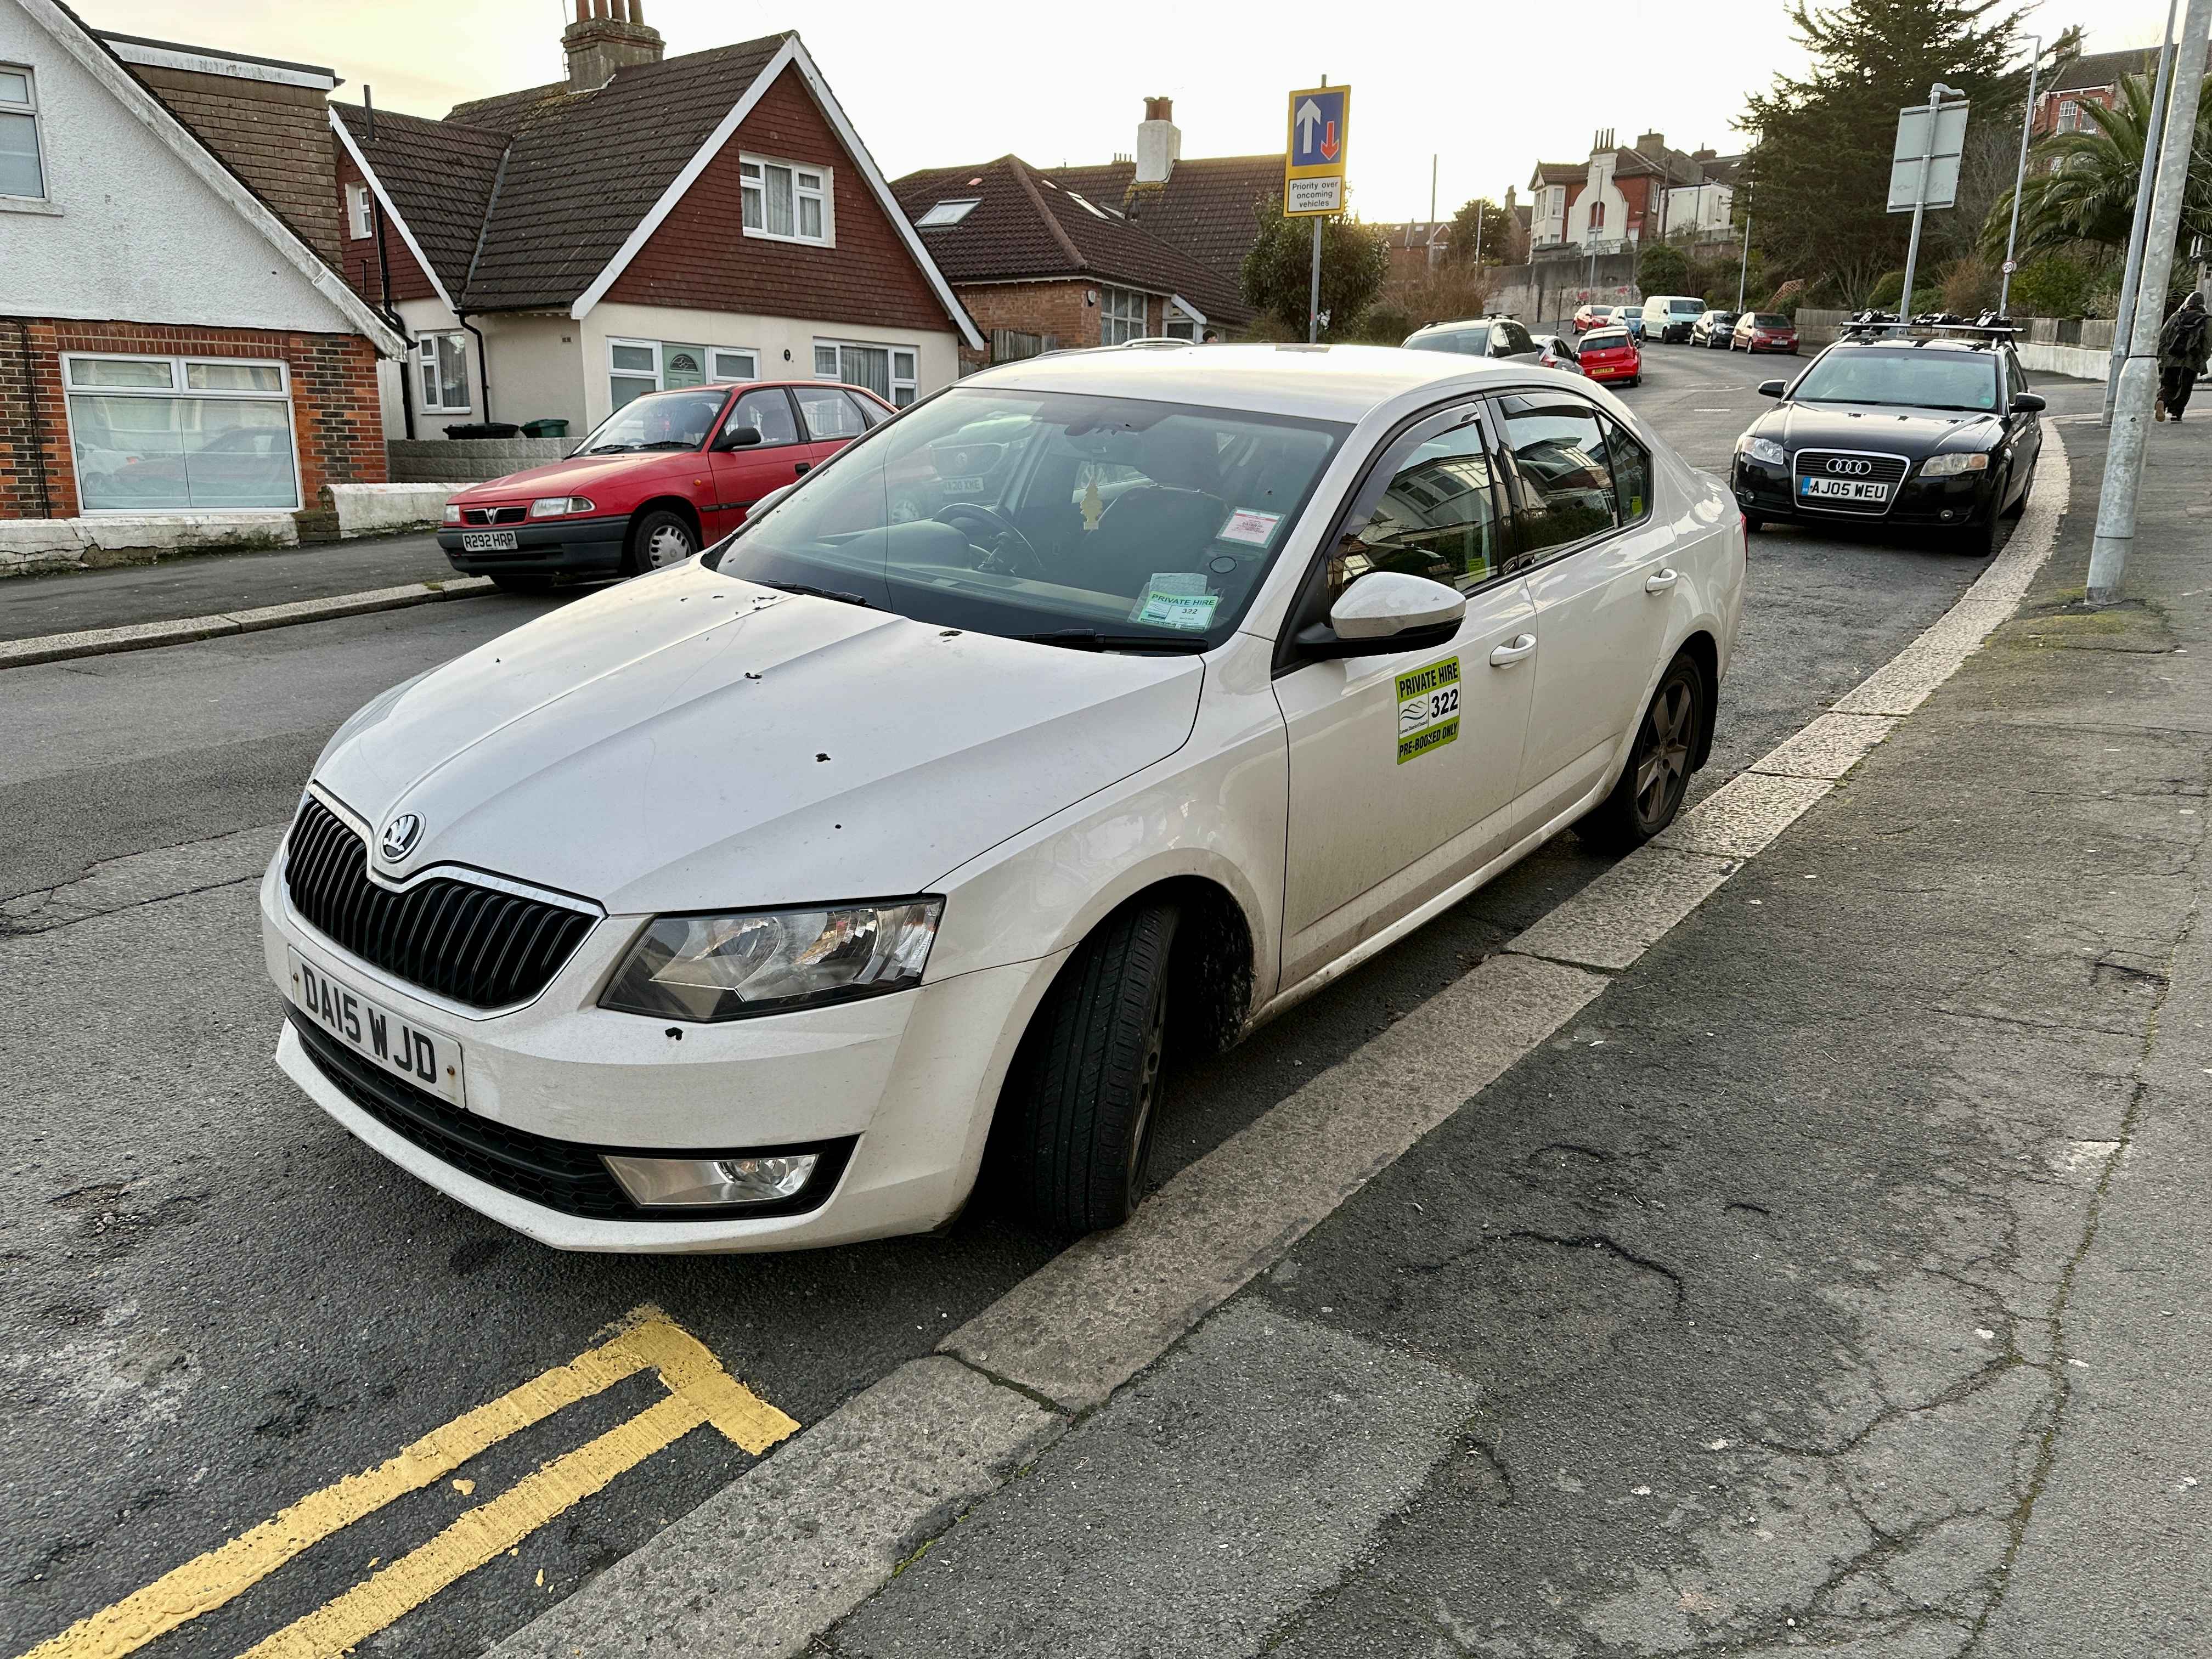 Photograph of DA15 WJD - a White Skoda Octavia taxi parked in Hollingdean by a non-resident. The fifth of five photographs supplied by the residents of Hollingdean.